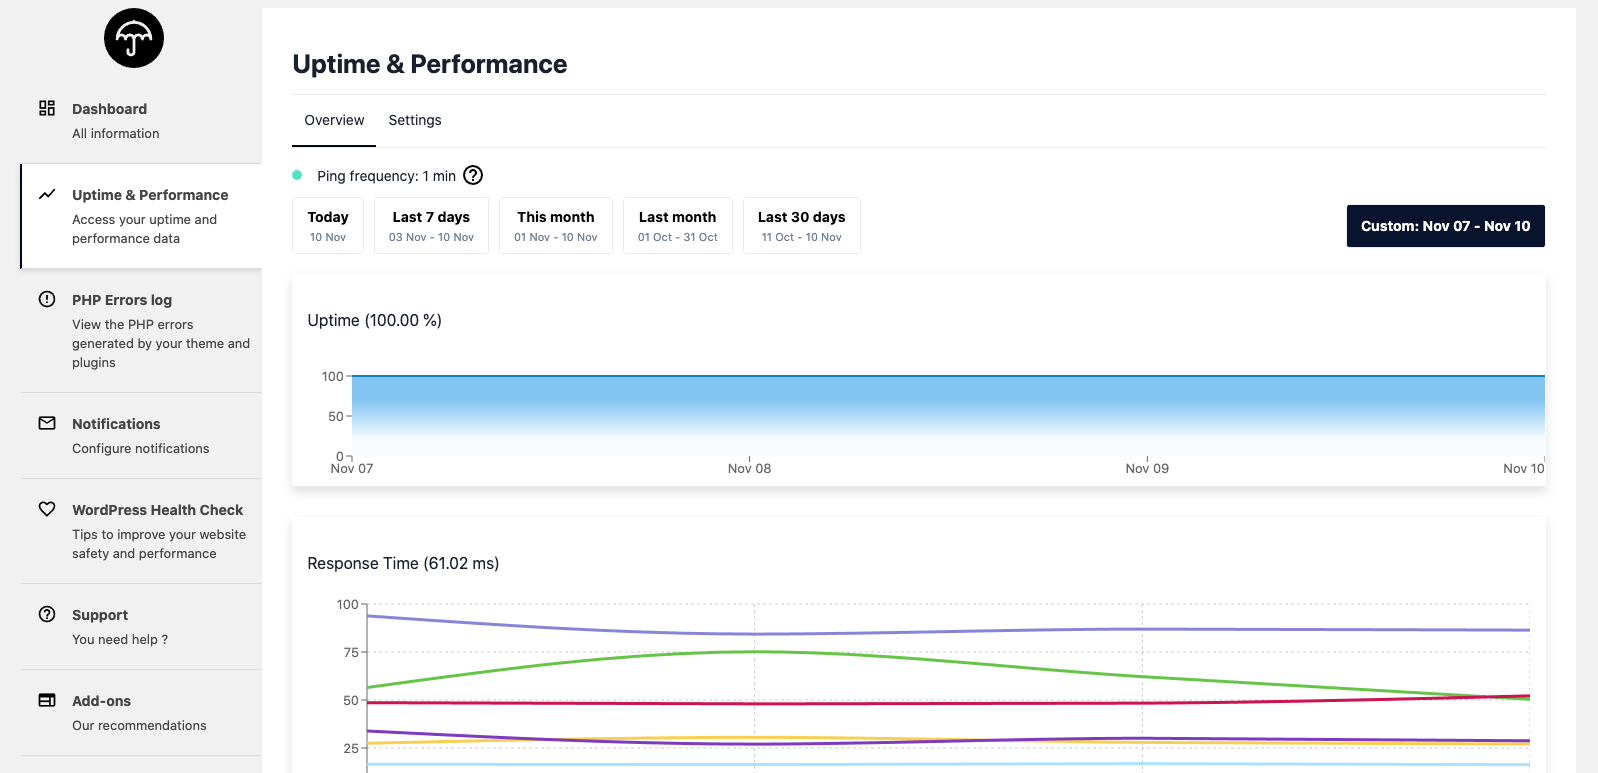 WP Umbrella dashboard for monitoring your WordPress website uptime downtime